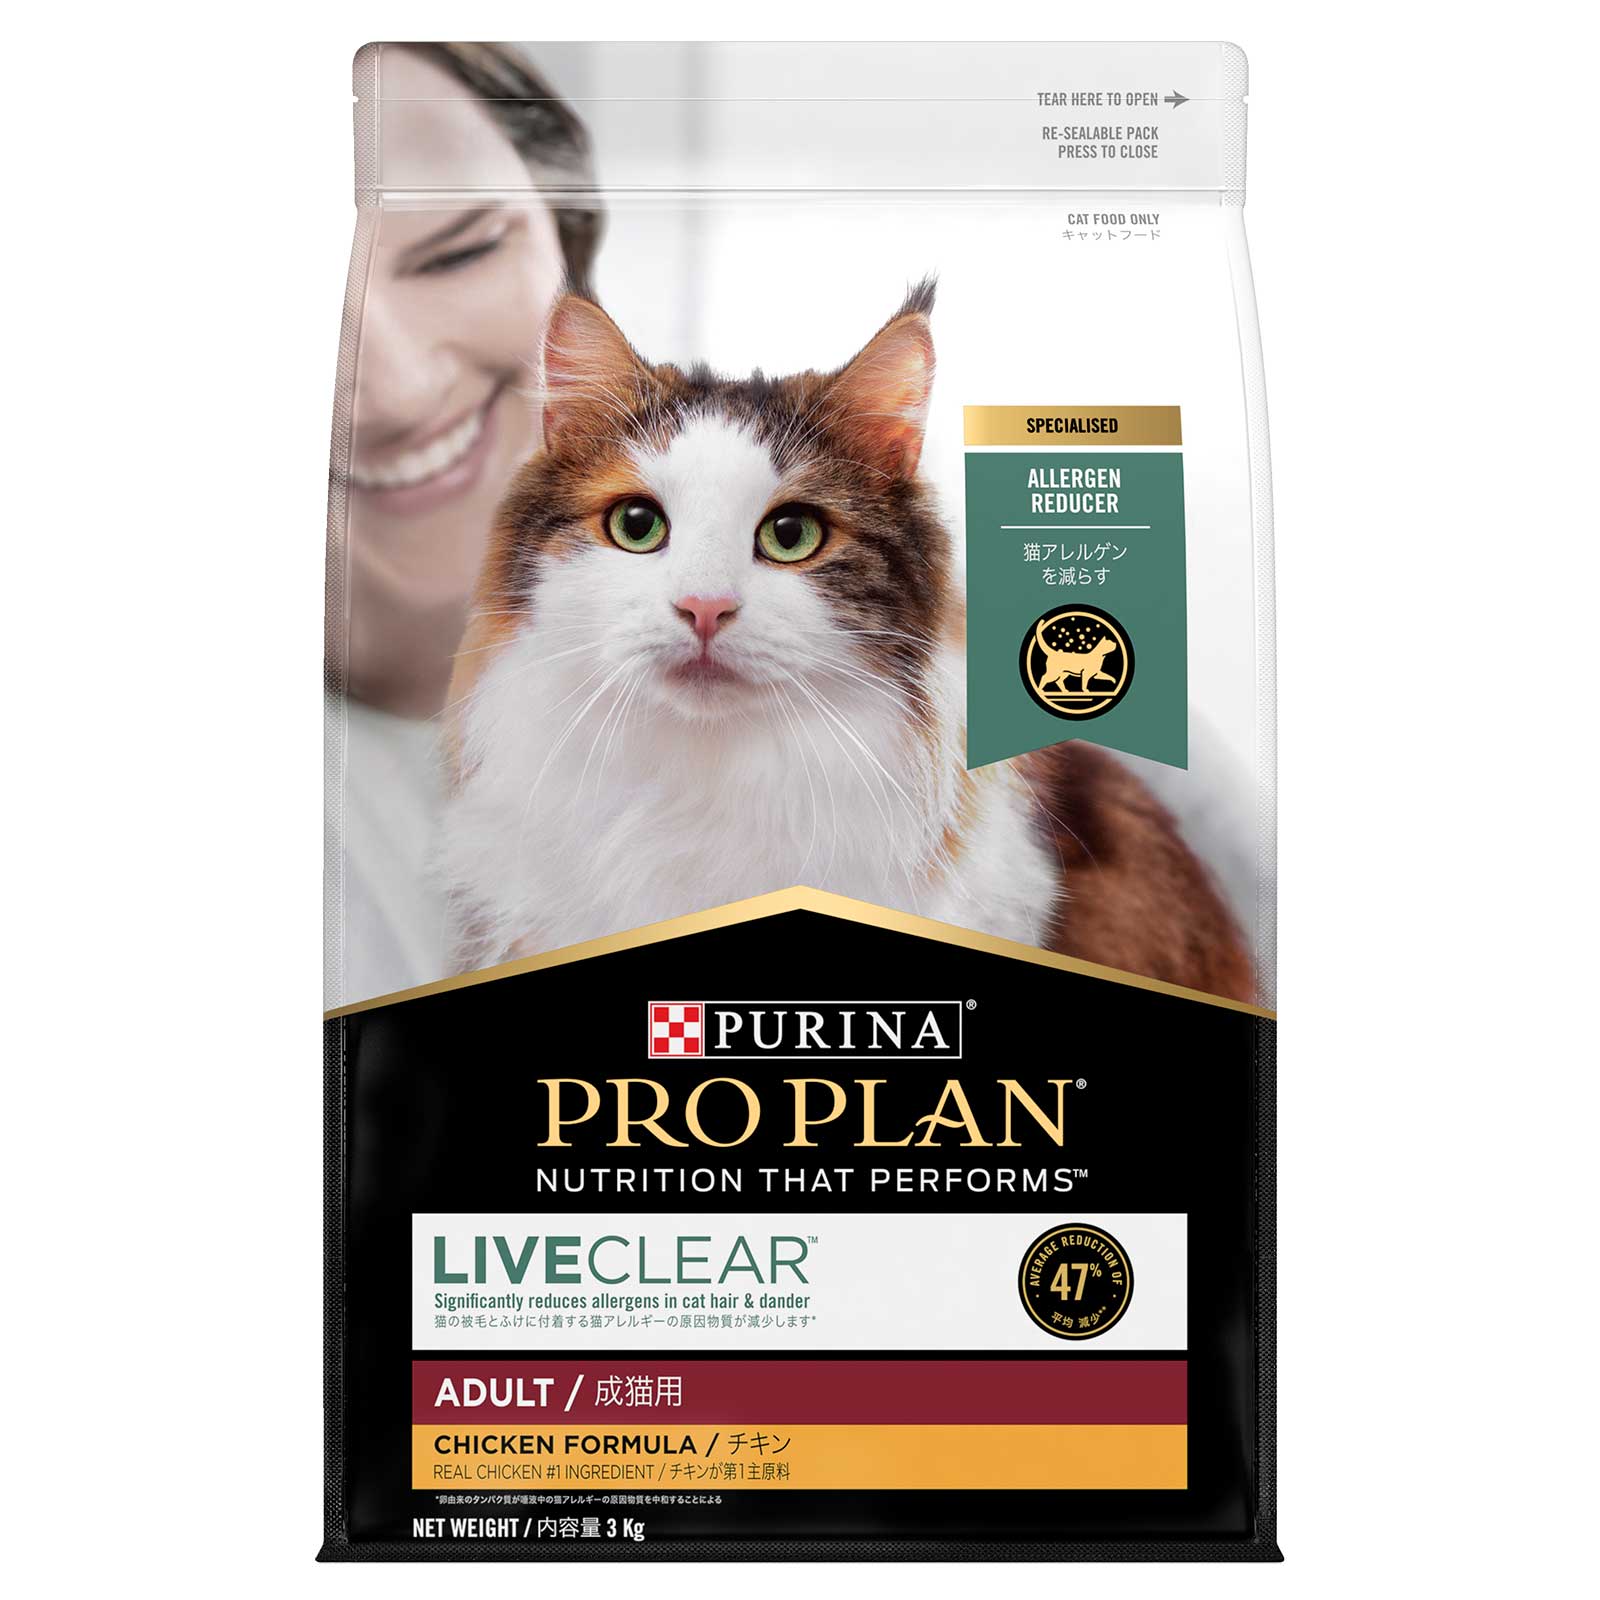 Pro Plan Cat Food LiveClear Adult